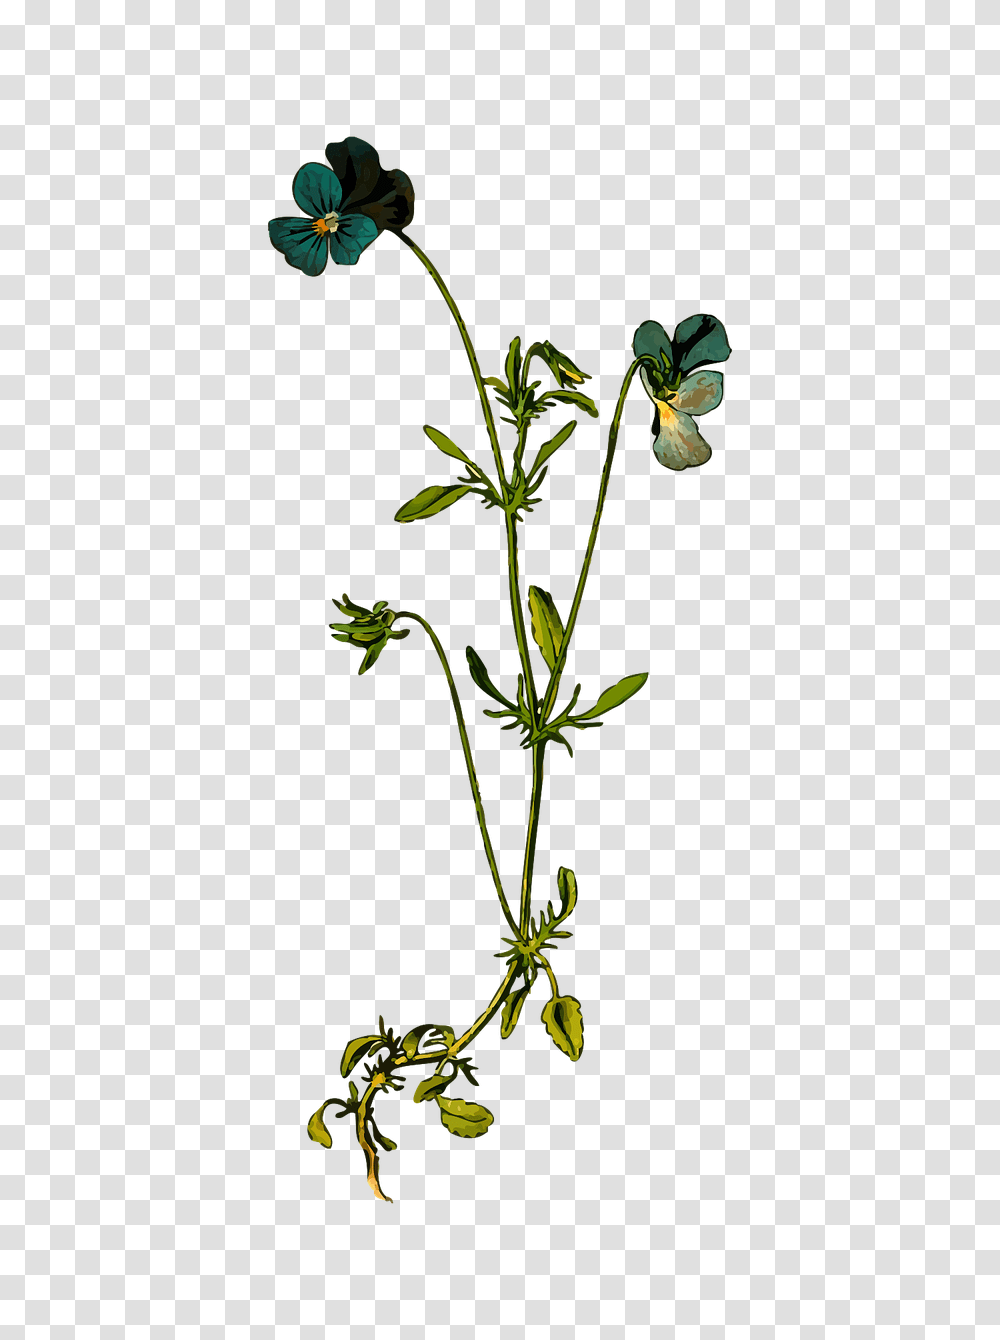 Wildflowers Wildflowers Images, Plant, Blossom, Acanthaceae, Apiaceae Transparent Png